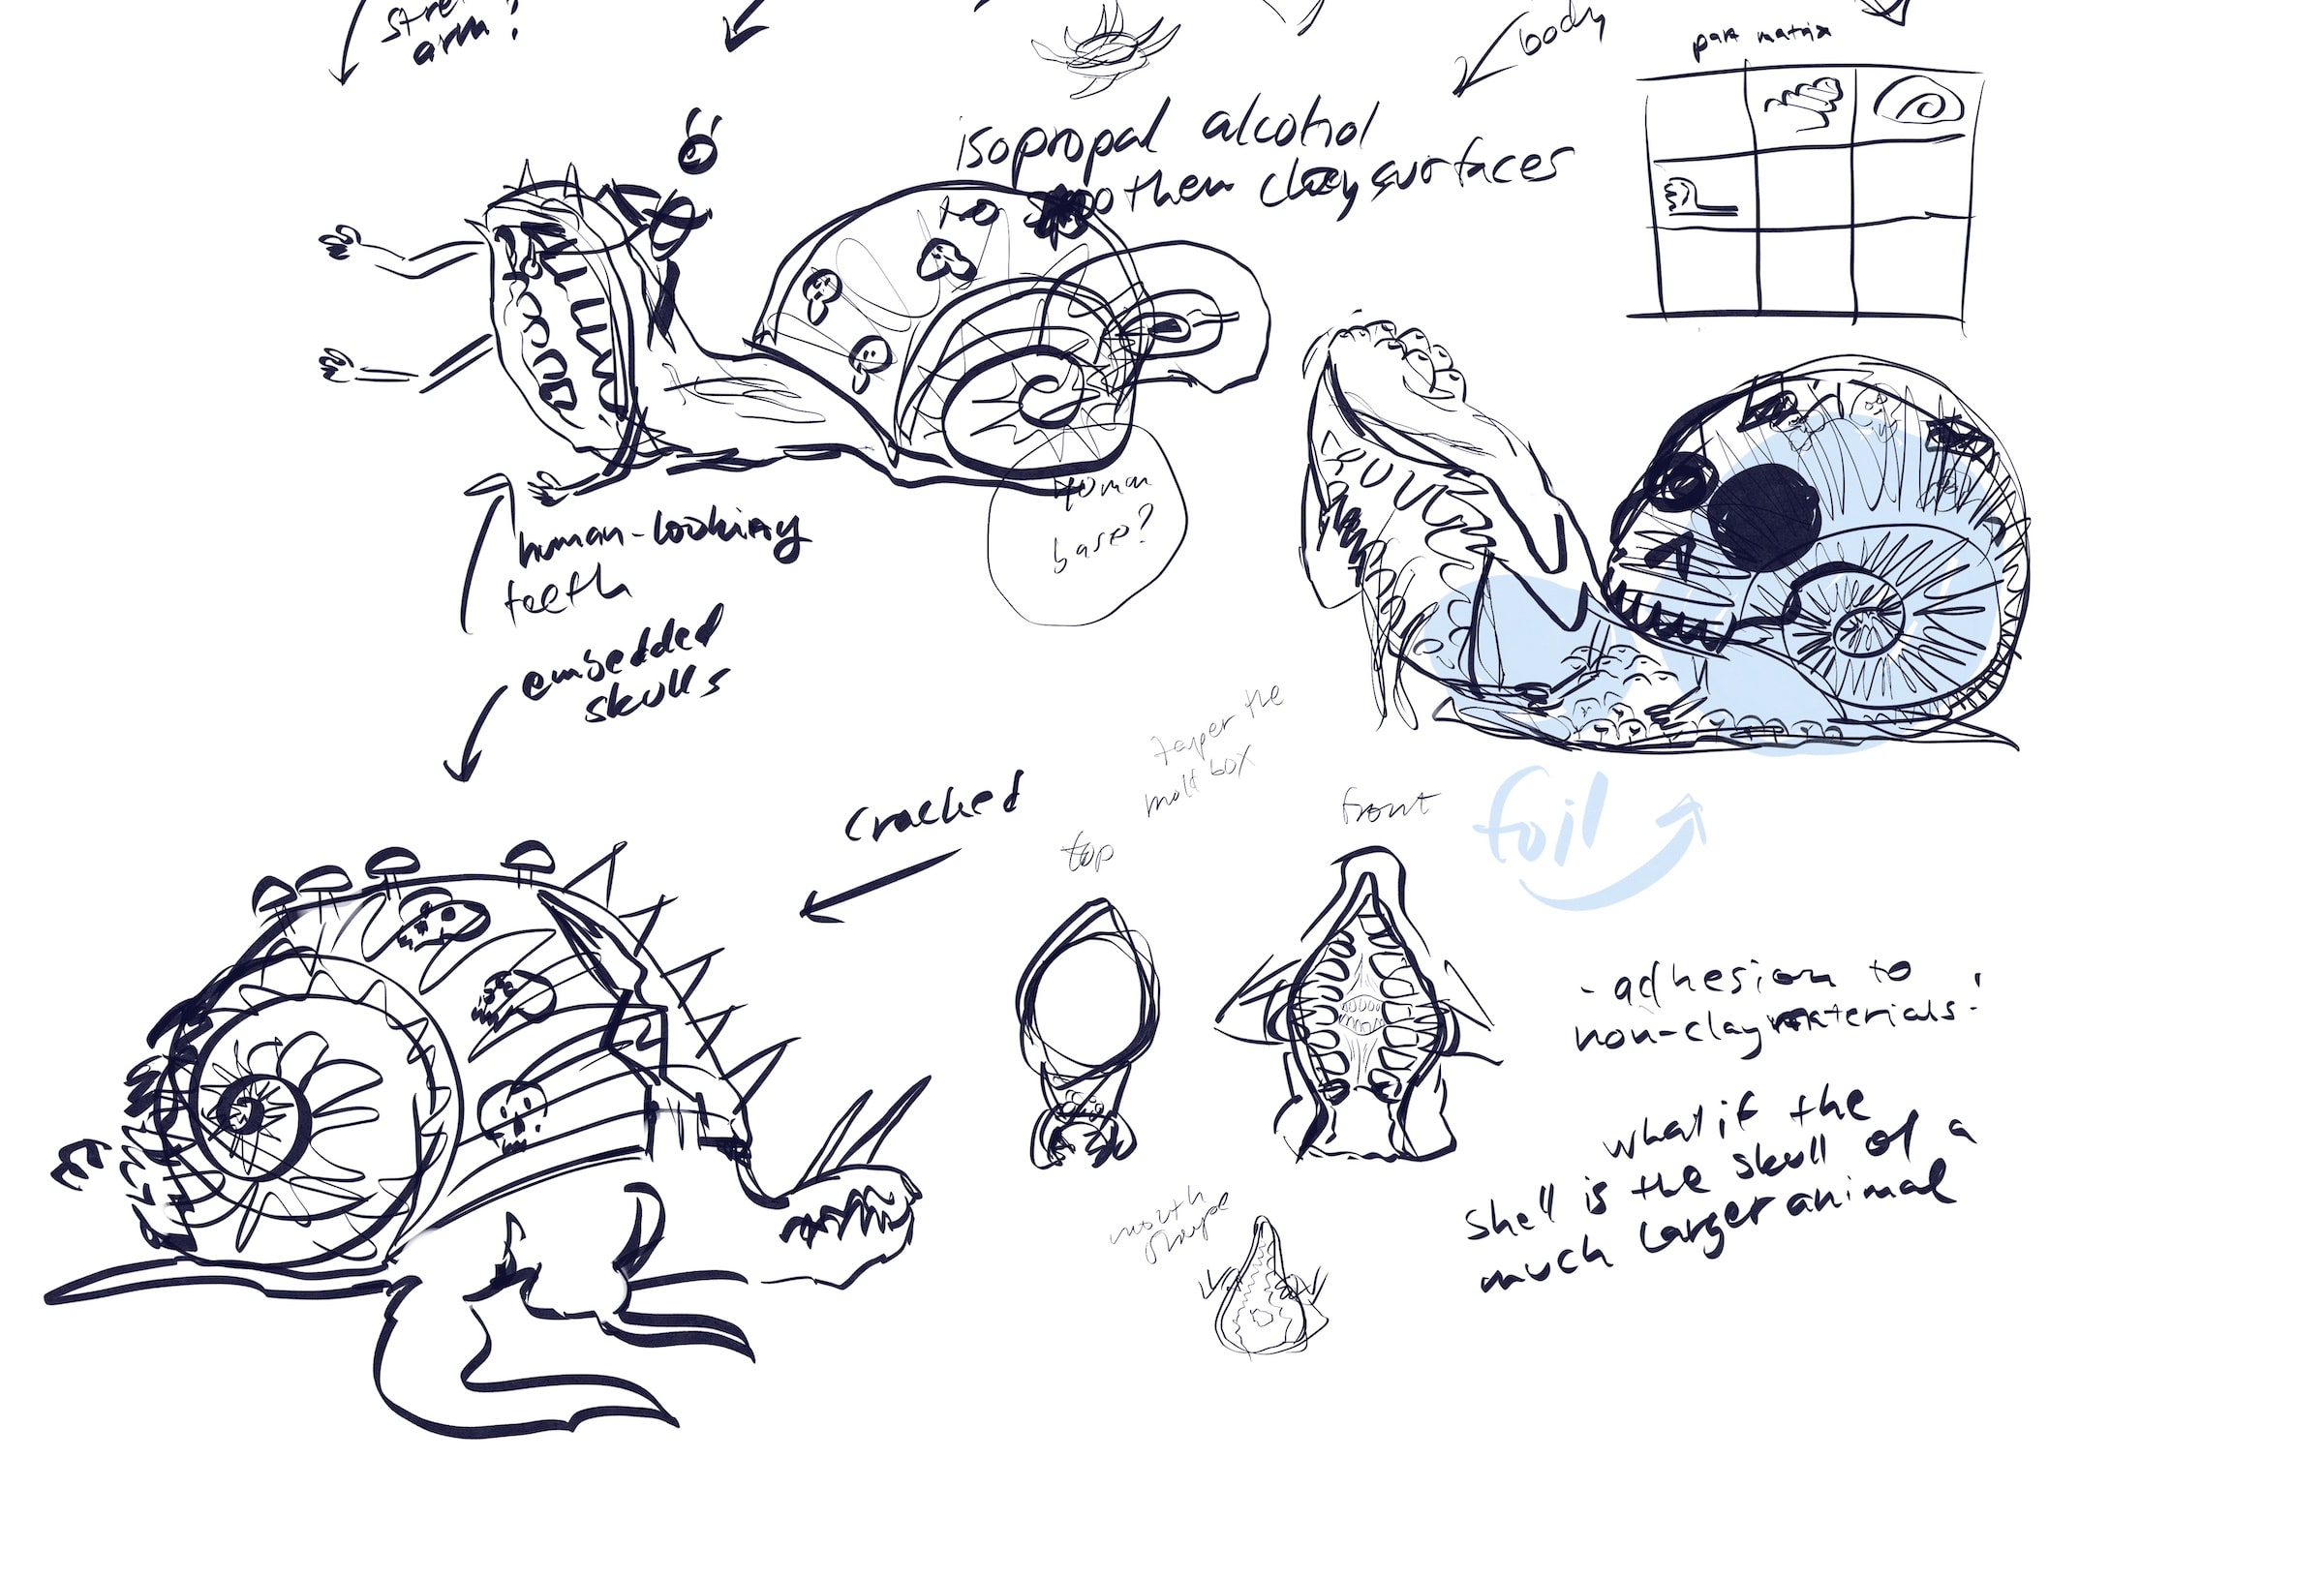 Rough sketches of different monstrous snails with human-teeth and skulls embedded in them.